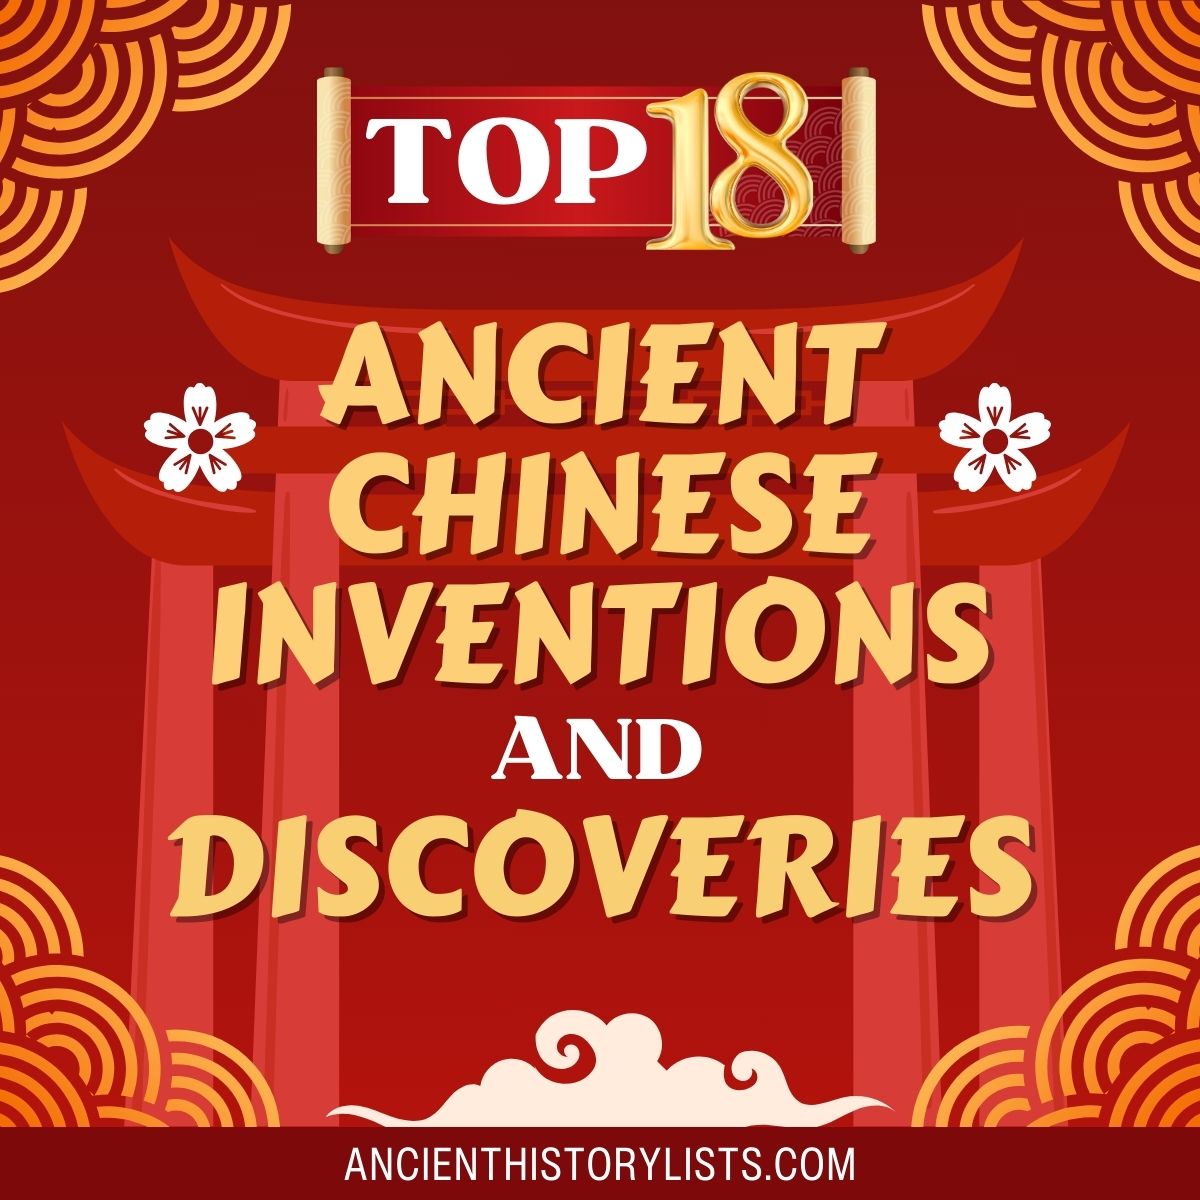 Ancient Chinese Inventions and Discoveries